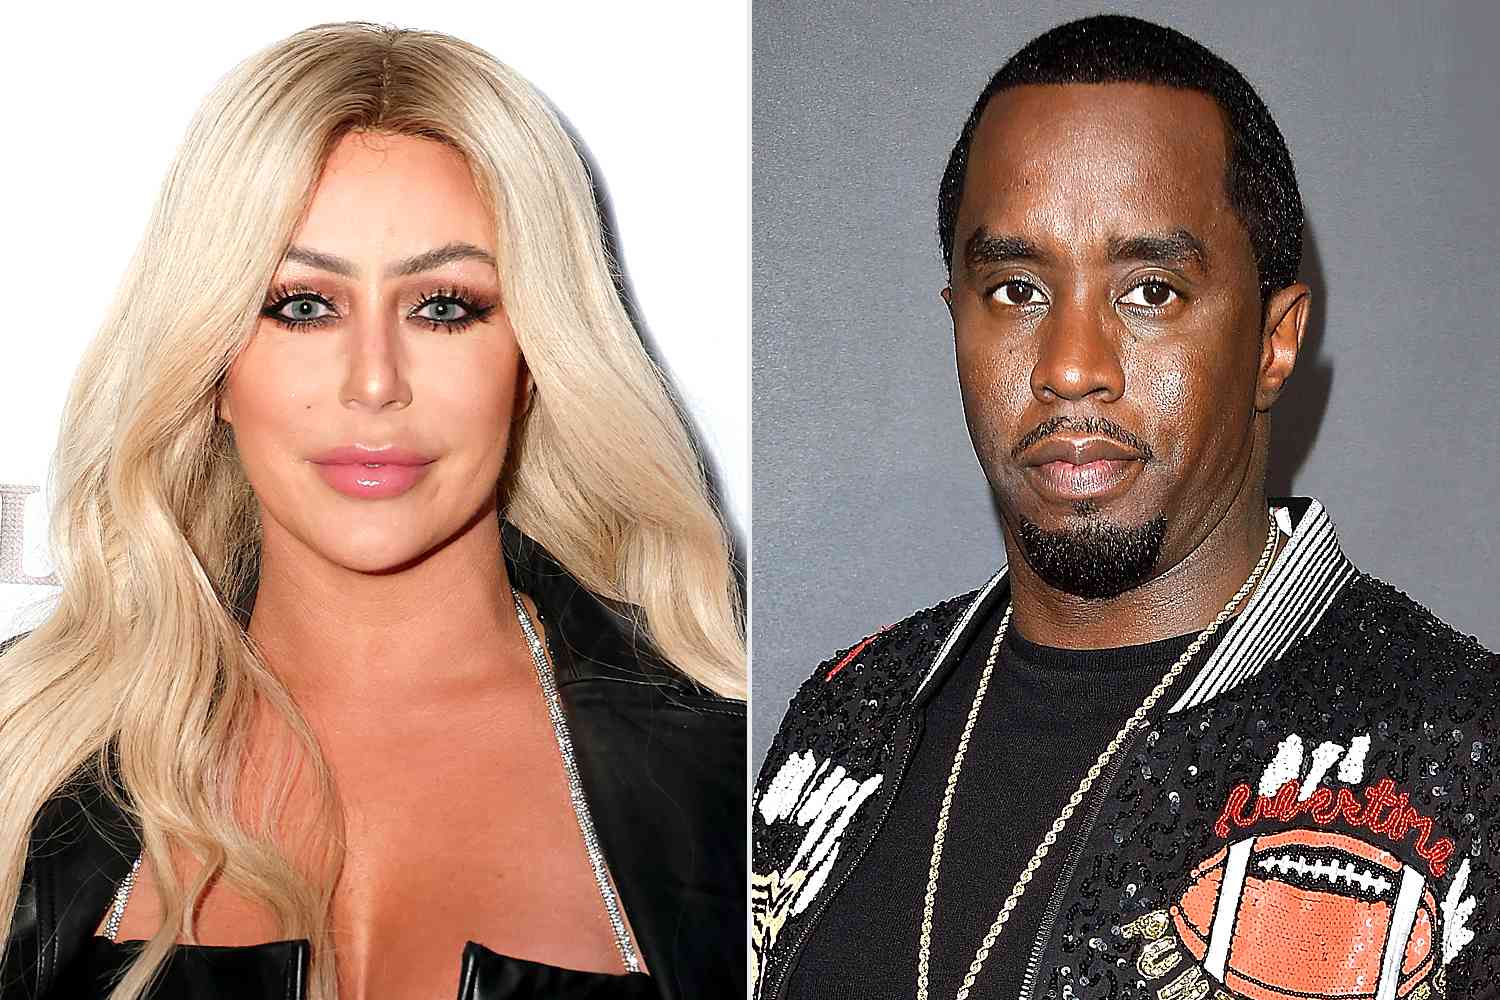 Aubrey O'Day Reacts After Sean 'Diddy' Combs' Homes Are Raided amid Lawsuits